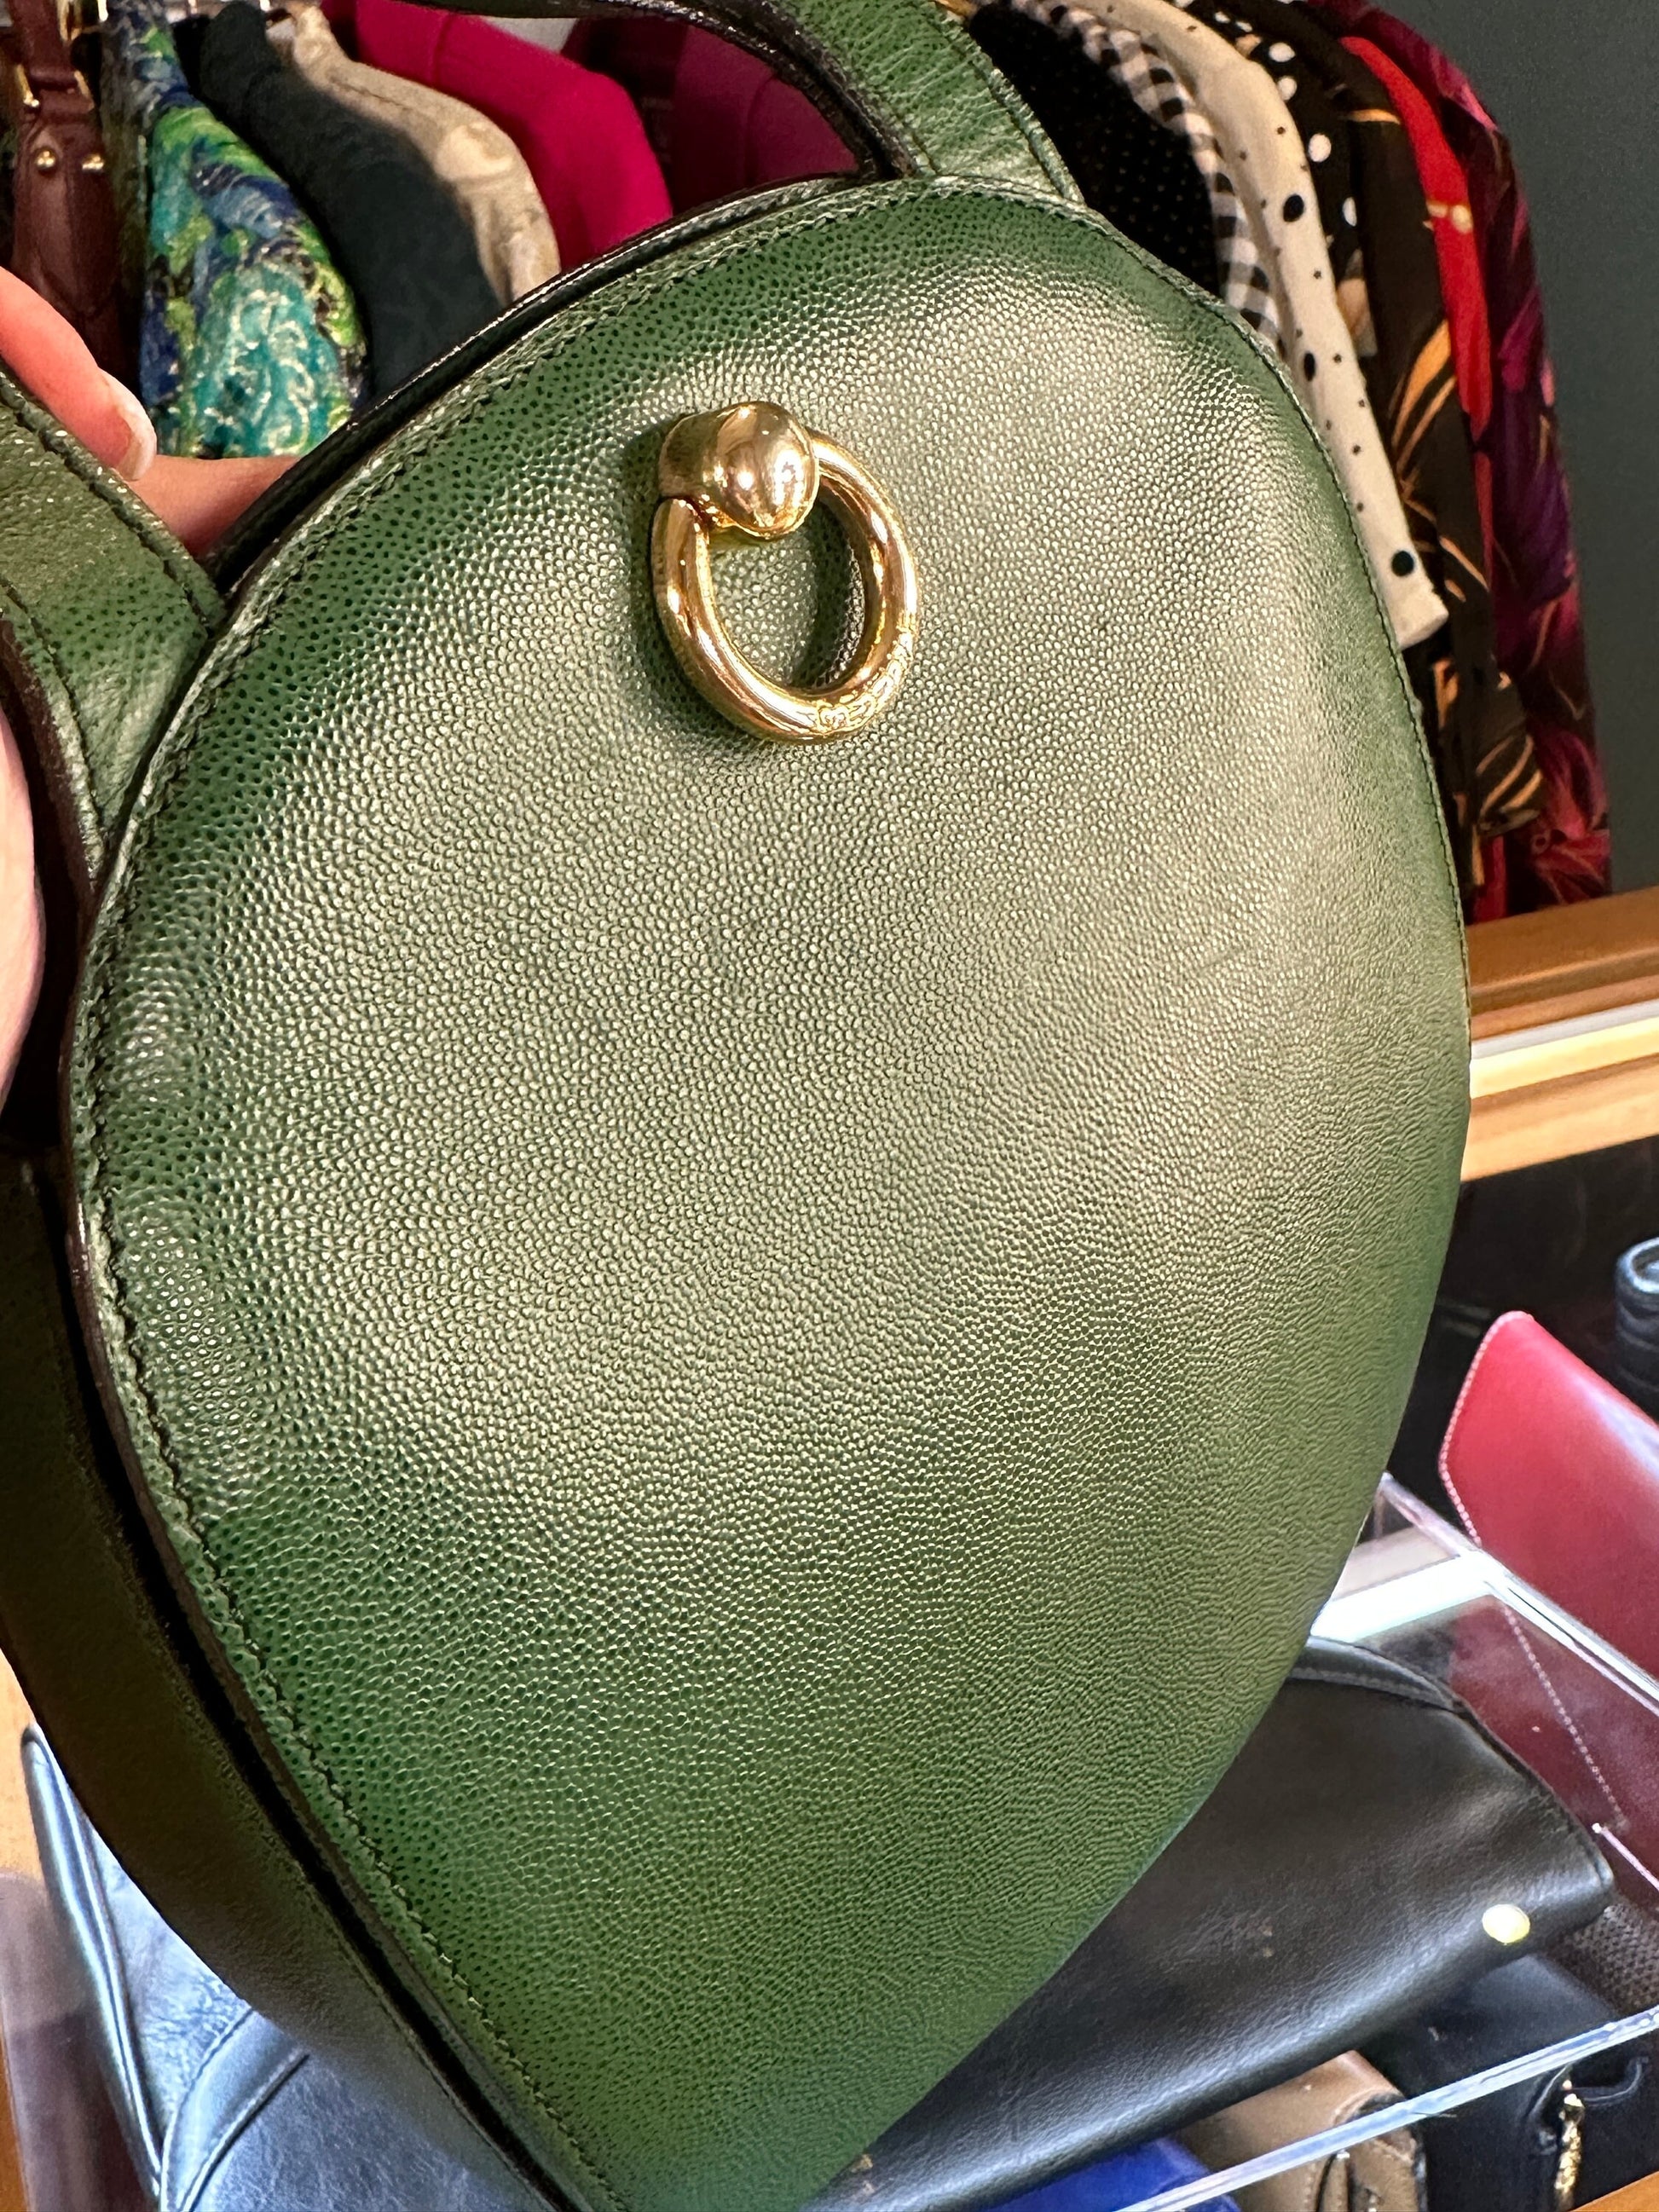 CELINE VINTAGE 100% Authentic Genuine, Leather Double Strap Shoulder Bag, Green, late 90's, Great Condition